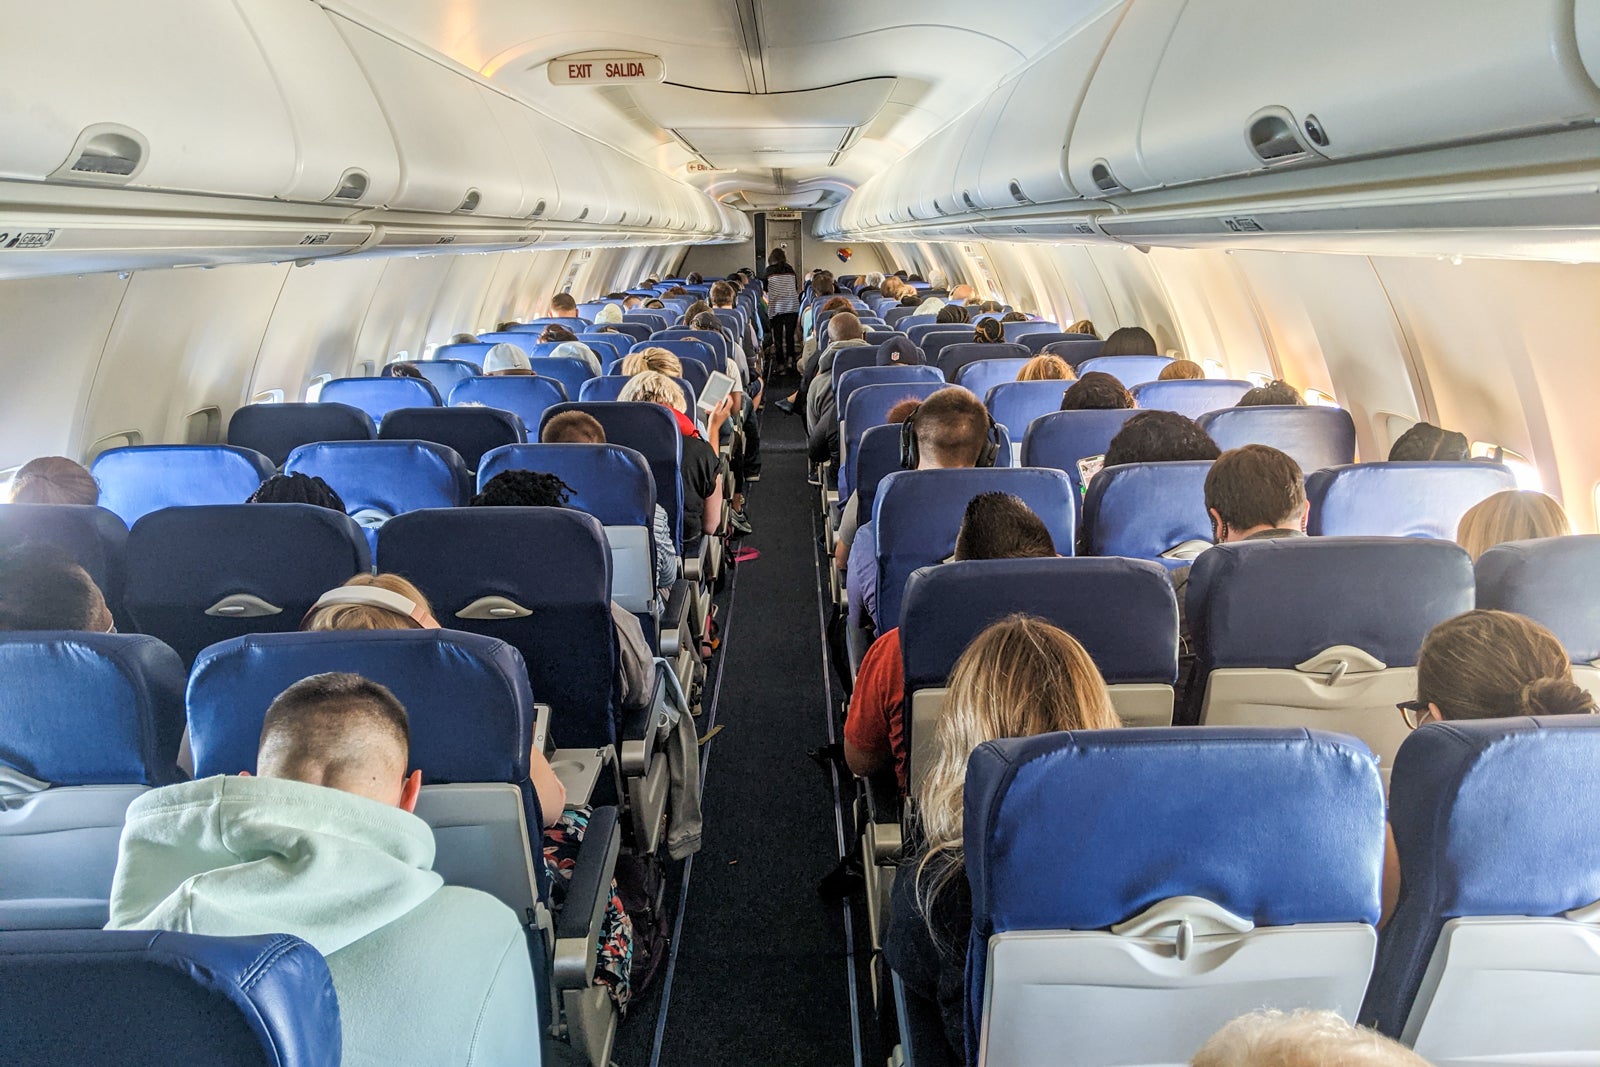 Passengers on a Southwest flight with just one person in the aisle